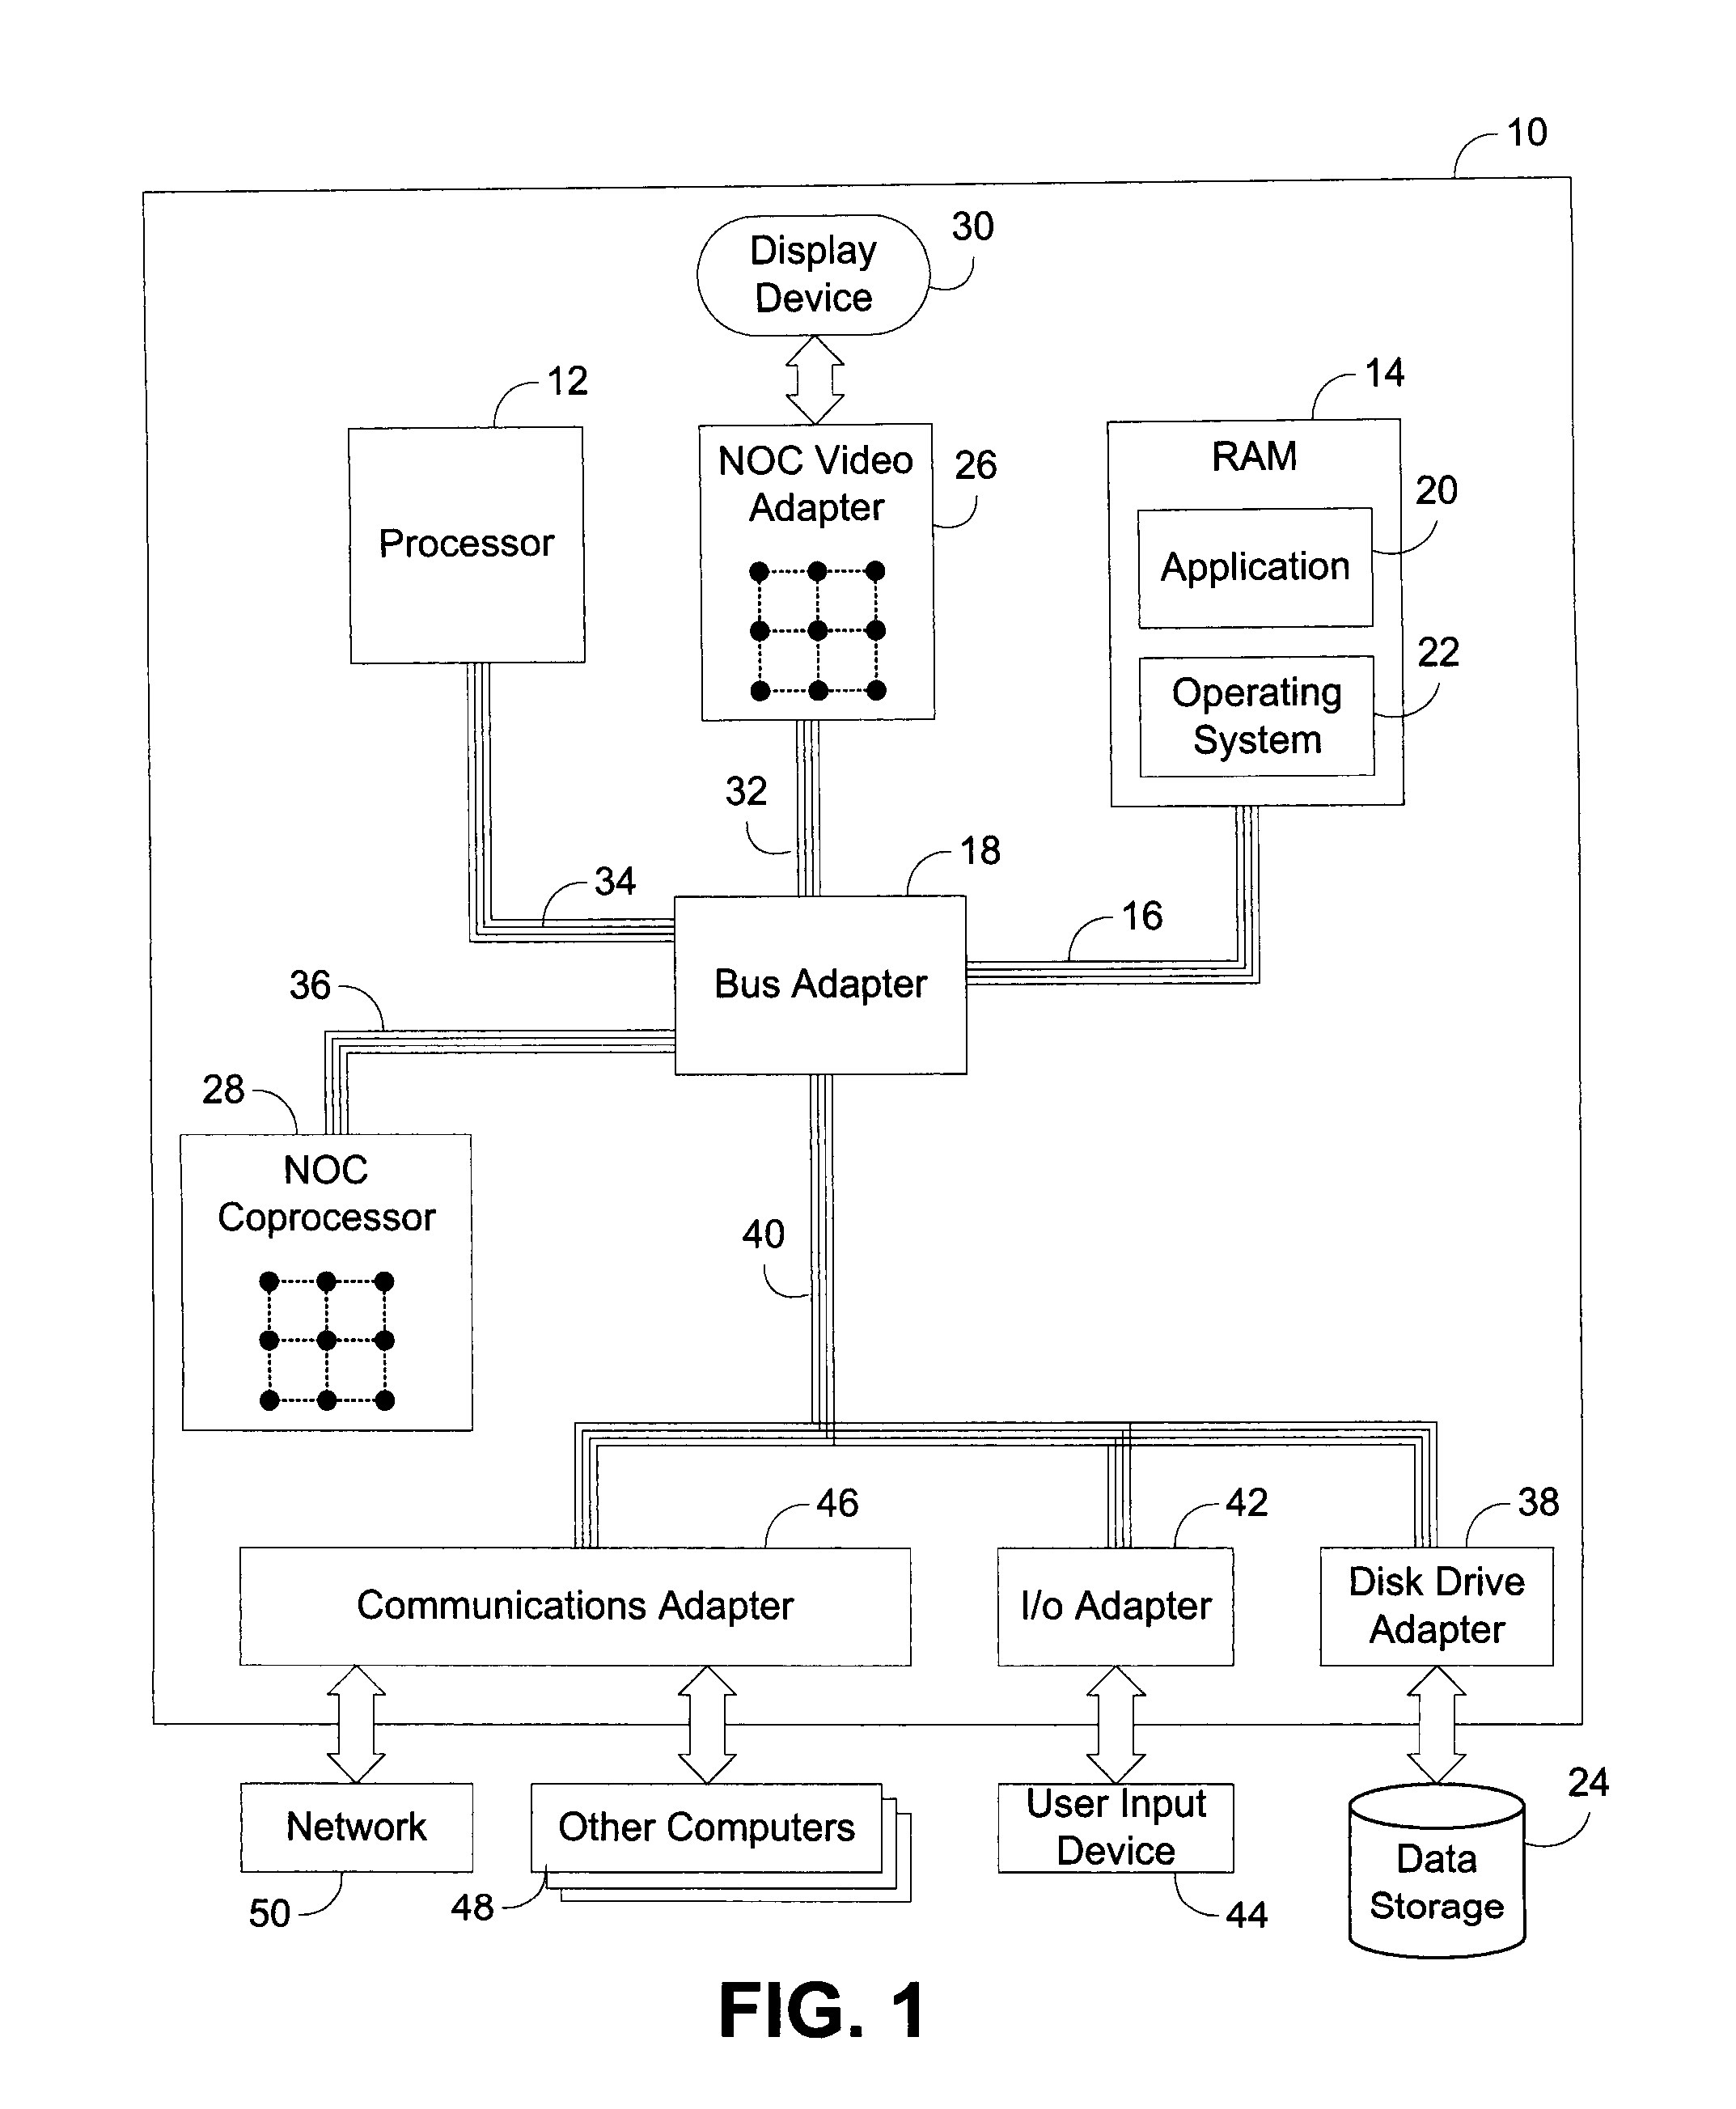 Resetting of Dynamically Grown Accelerated Data Structure